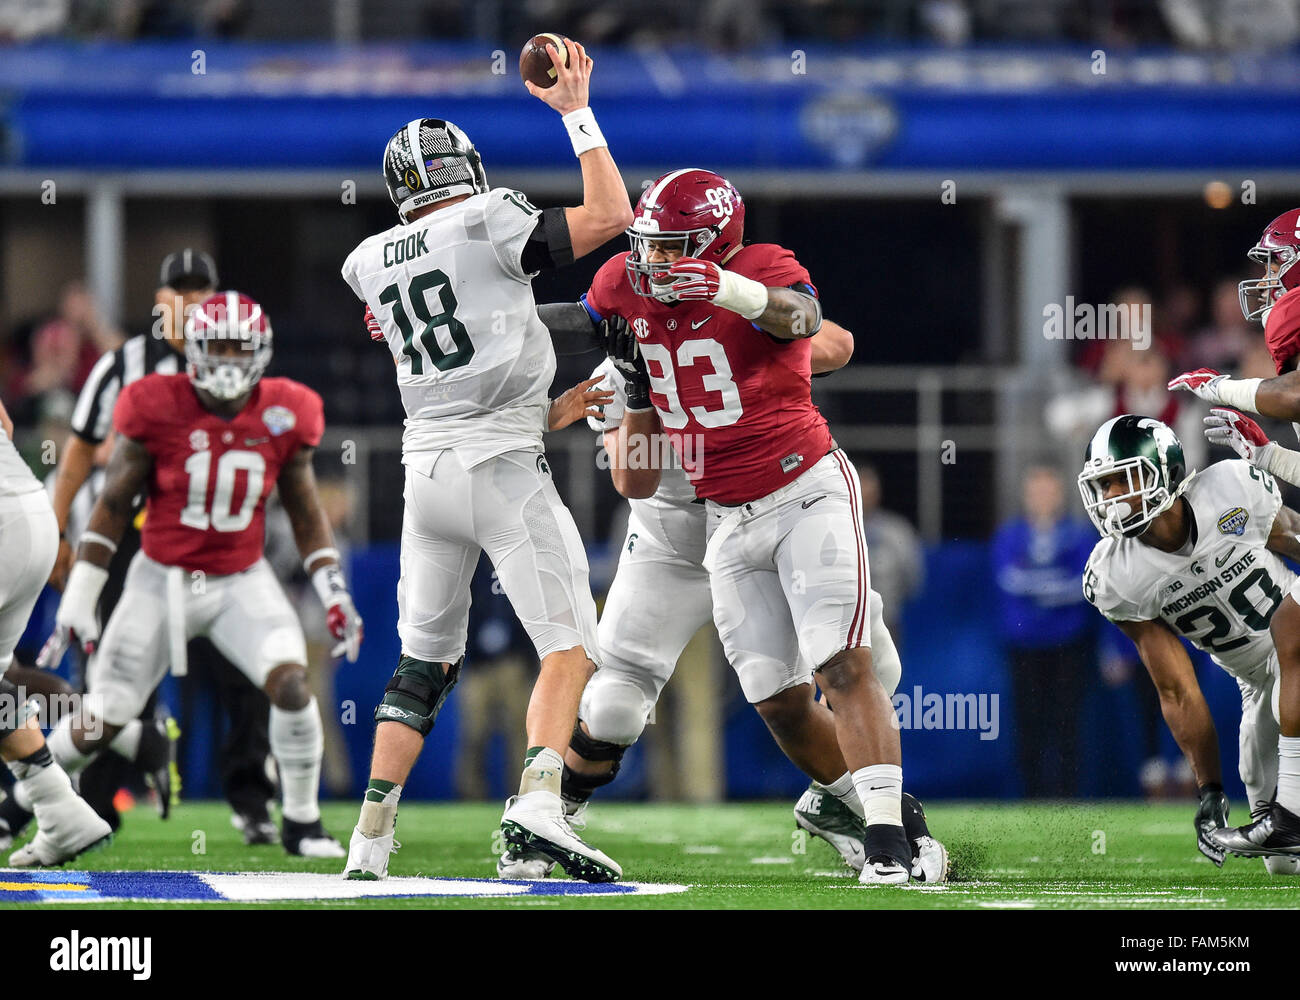 Arlington, Texas. 31st Dec, 2015. Michigan State Spartans quarterback Connor Cook (18) looks down field as Alabama Crimson Tide defensive lineman Jonathan Allen (93) rushes and gets a sack during the 2015 Goodyear Cotton Bowl game between the Michigan State Spartans and Alabama Crimson Tide at the AT&T Stadium in Arlington Texas.Alabama wins 38-0. Credit:  Manny Flores/Cal Sport Media/Alamy Live News Stock Photo